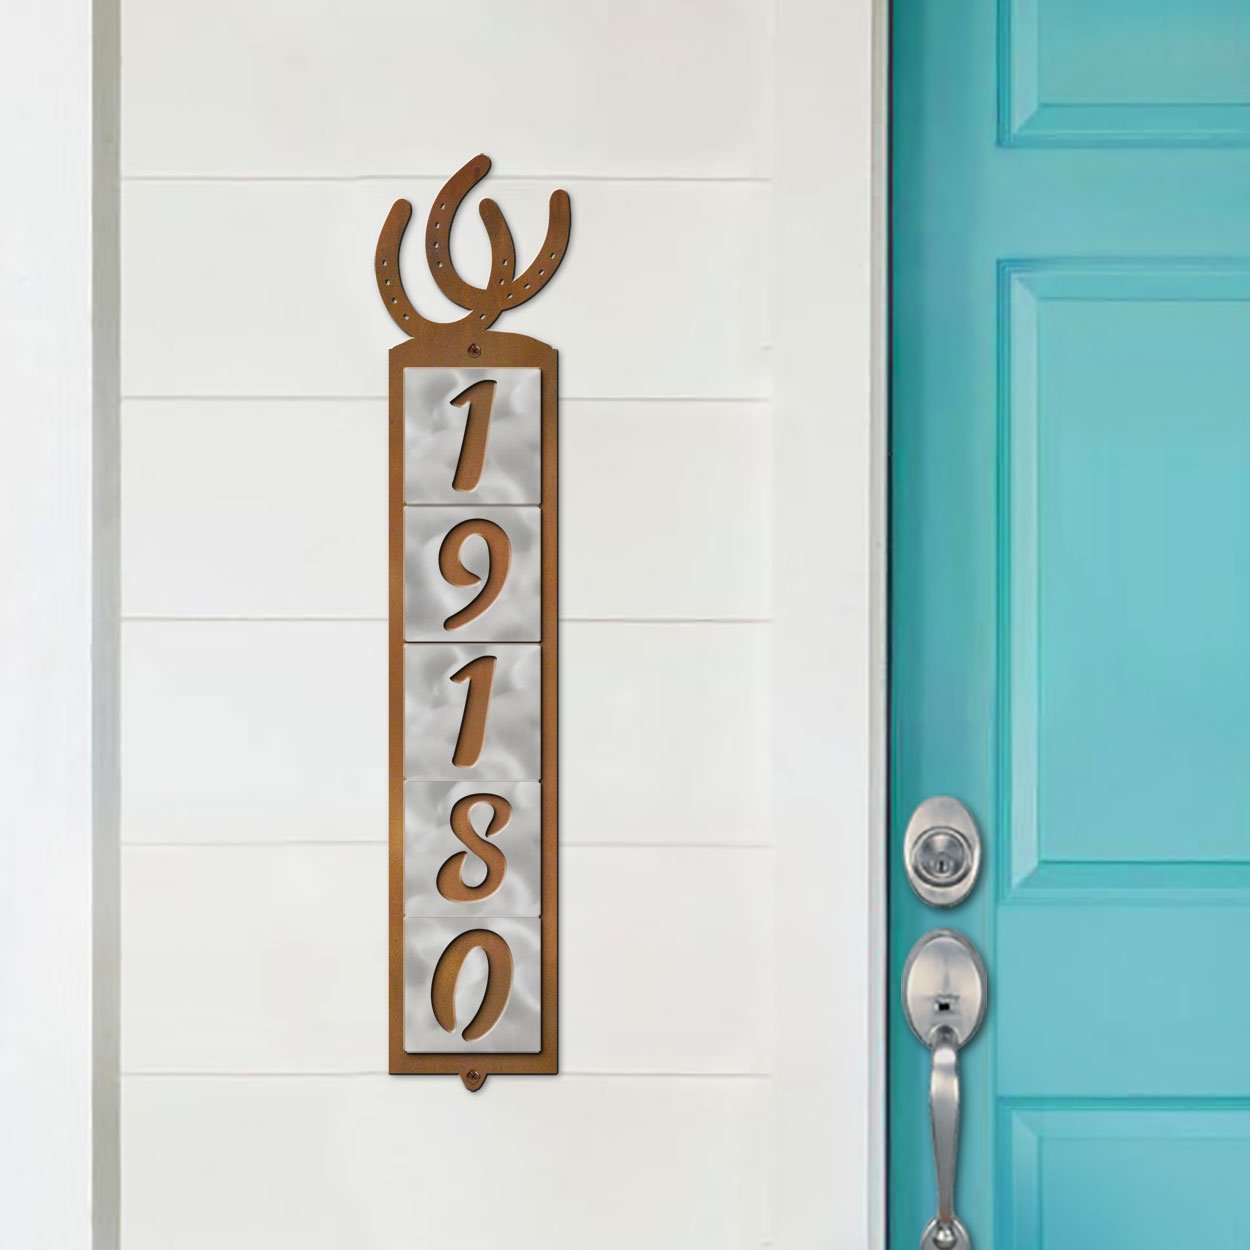 605345 - Horseshoes Design 5-Digit Vertical Tile House Numbers